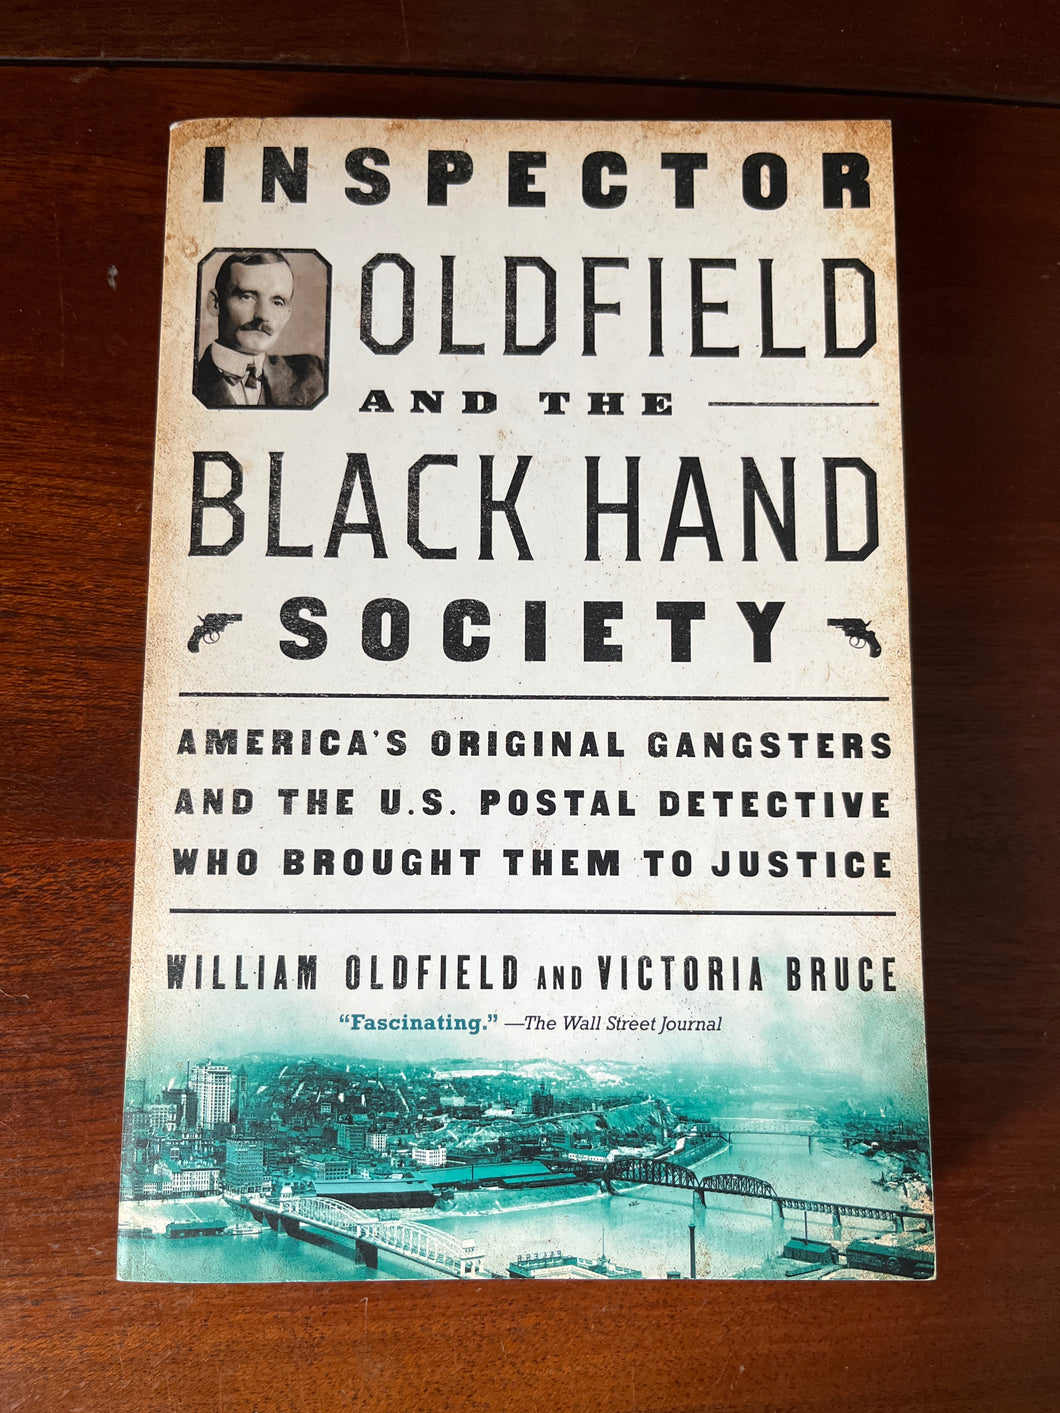 Inspector Oldfield and the Black Hand Society: America's Original Gangsters and the U.S. Postal Detective Who Brought Them to Justice